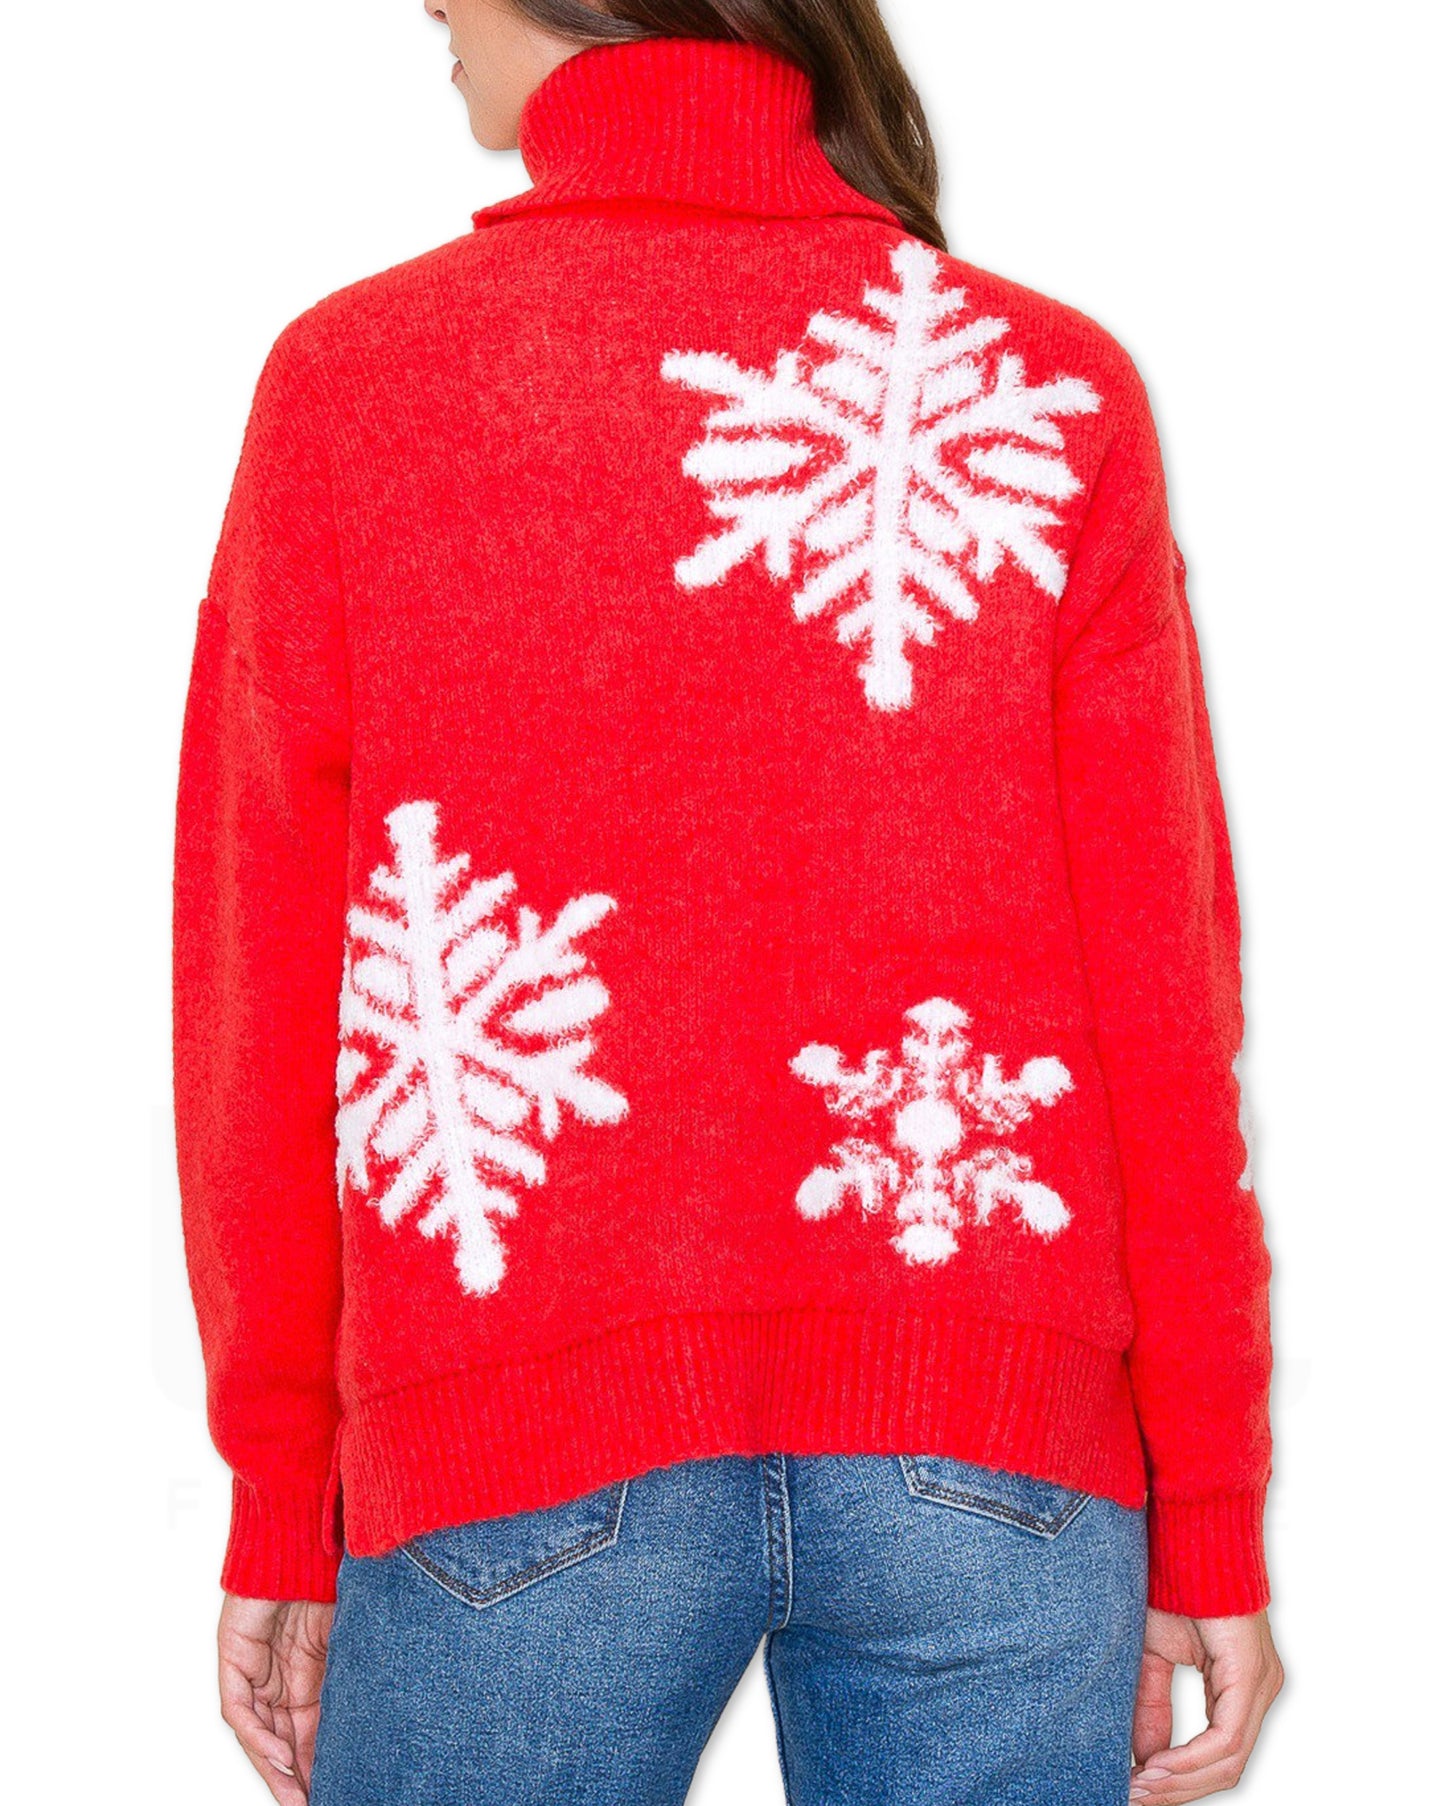 Snowflake Sweater - Red